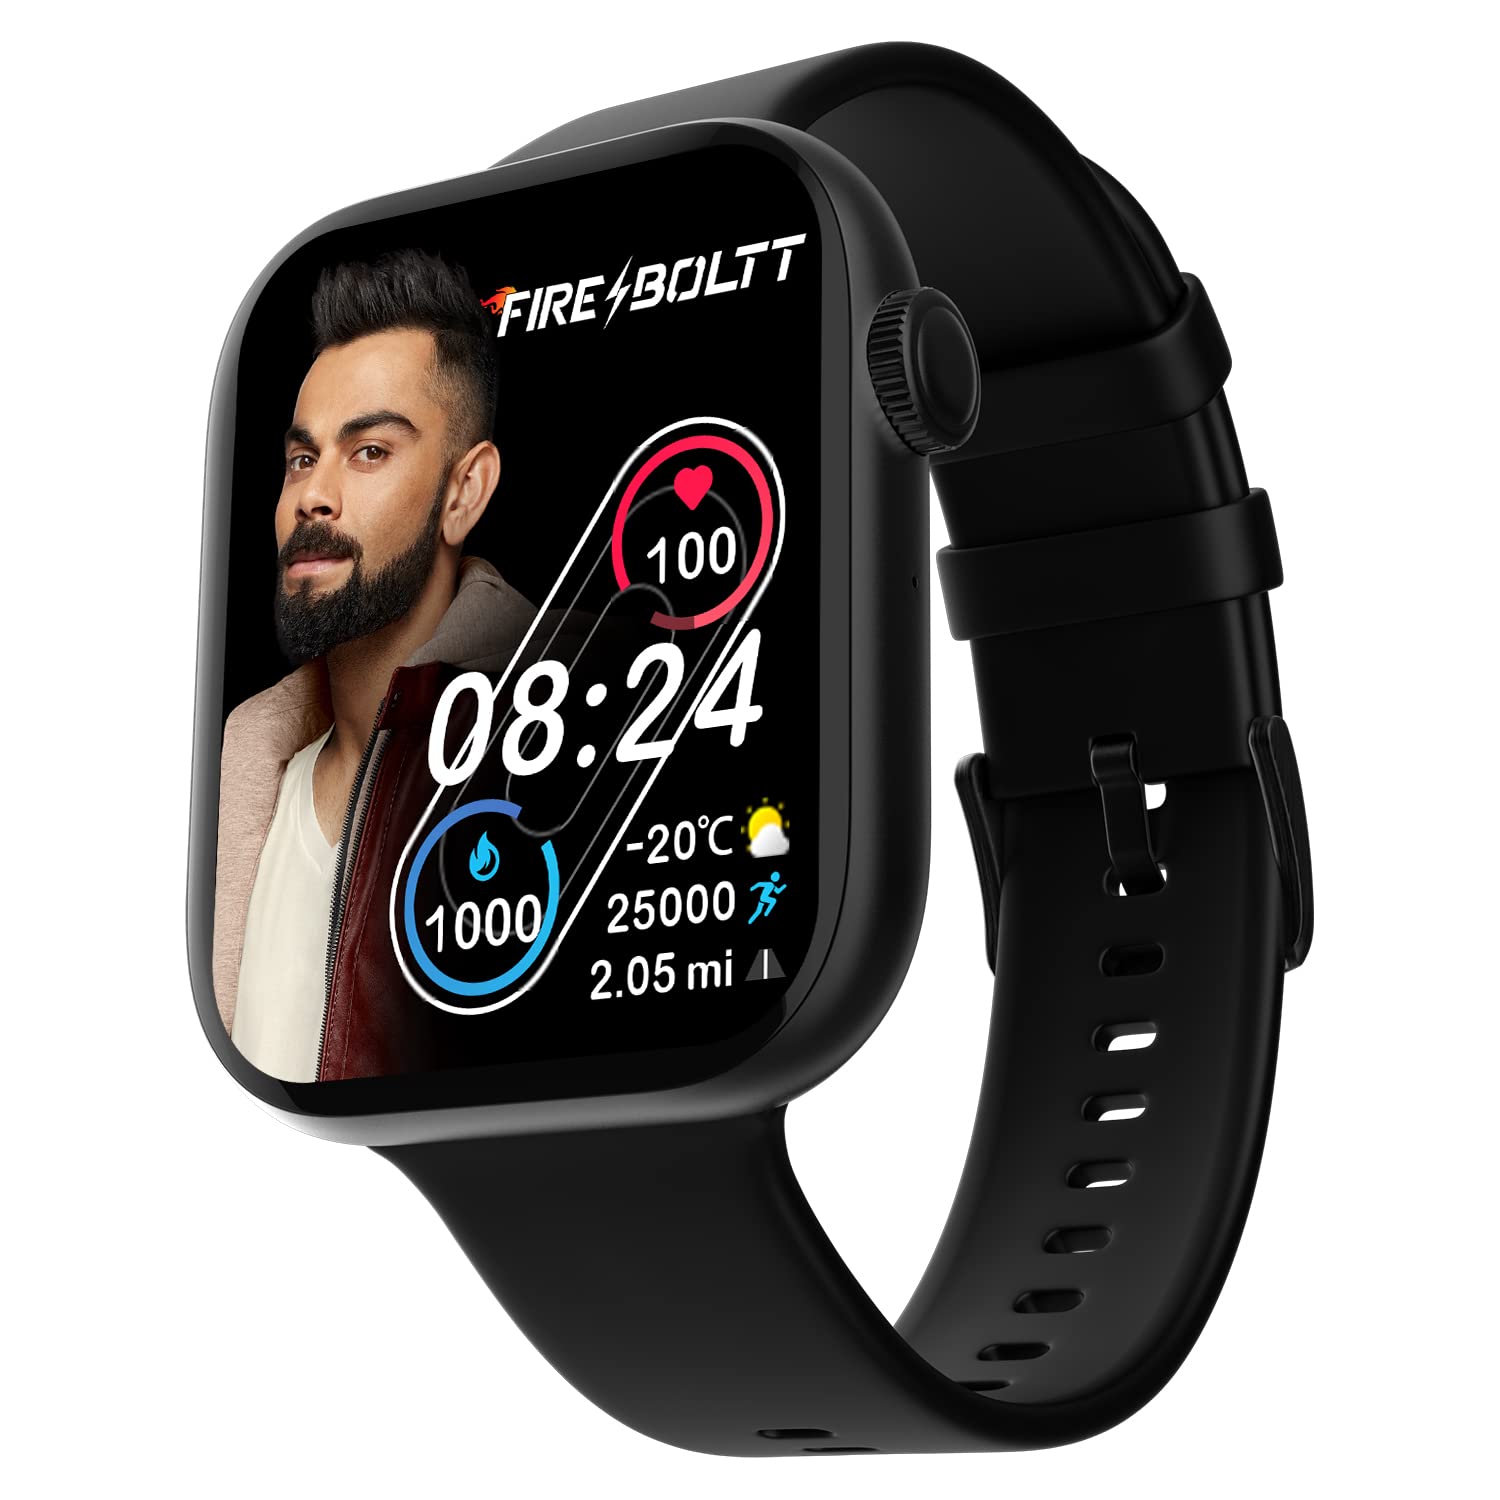 Fire-Boltt Ring 3 Bluetooth Calling Smartwatch 1.8″ Biggest Display, Voice Assistance,118 Sports Modes, in Built Calculator & Games, SpO2, Heart Rate Monitoring